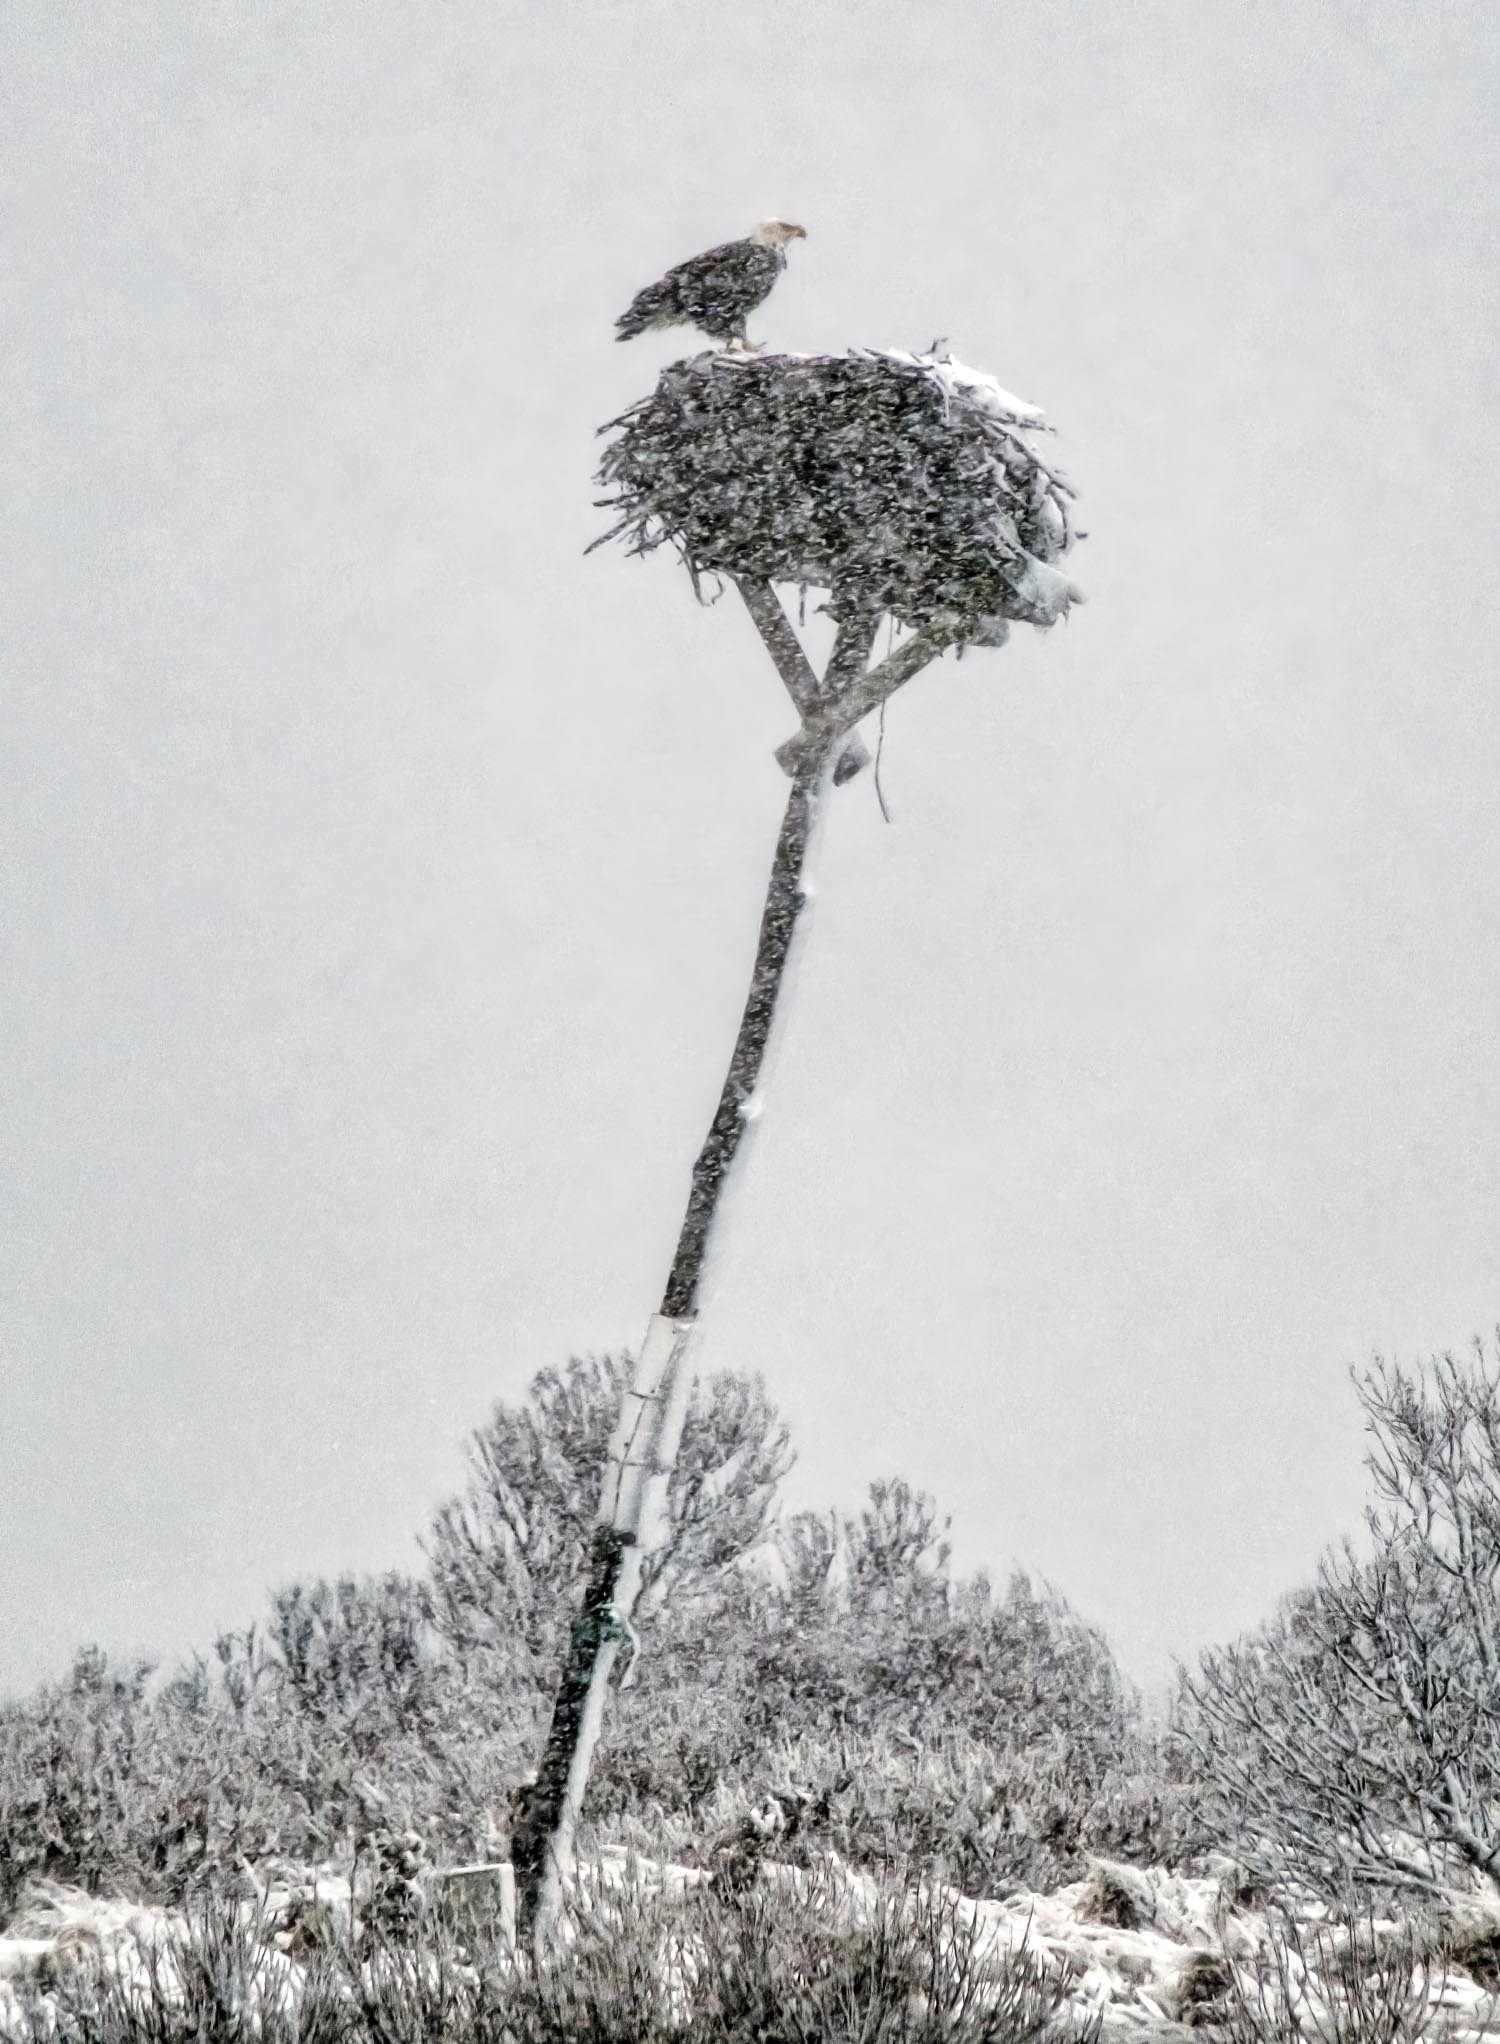 A bald eagle perches on an osprey nest in Southampton during Tuesday's snowstorm.